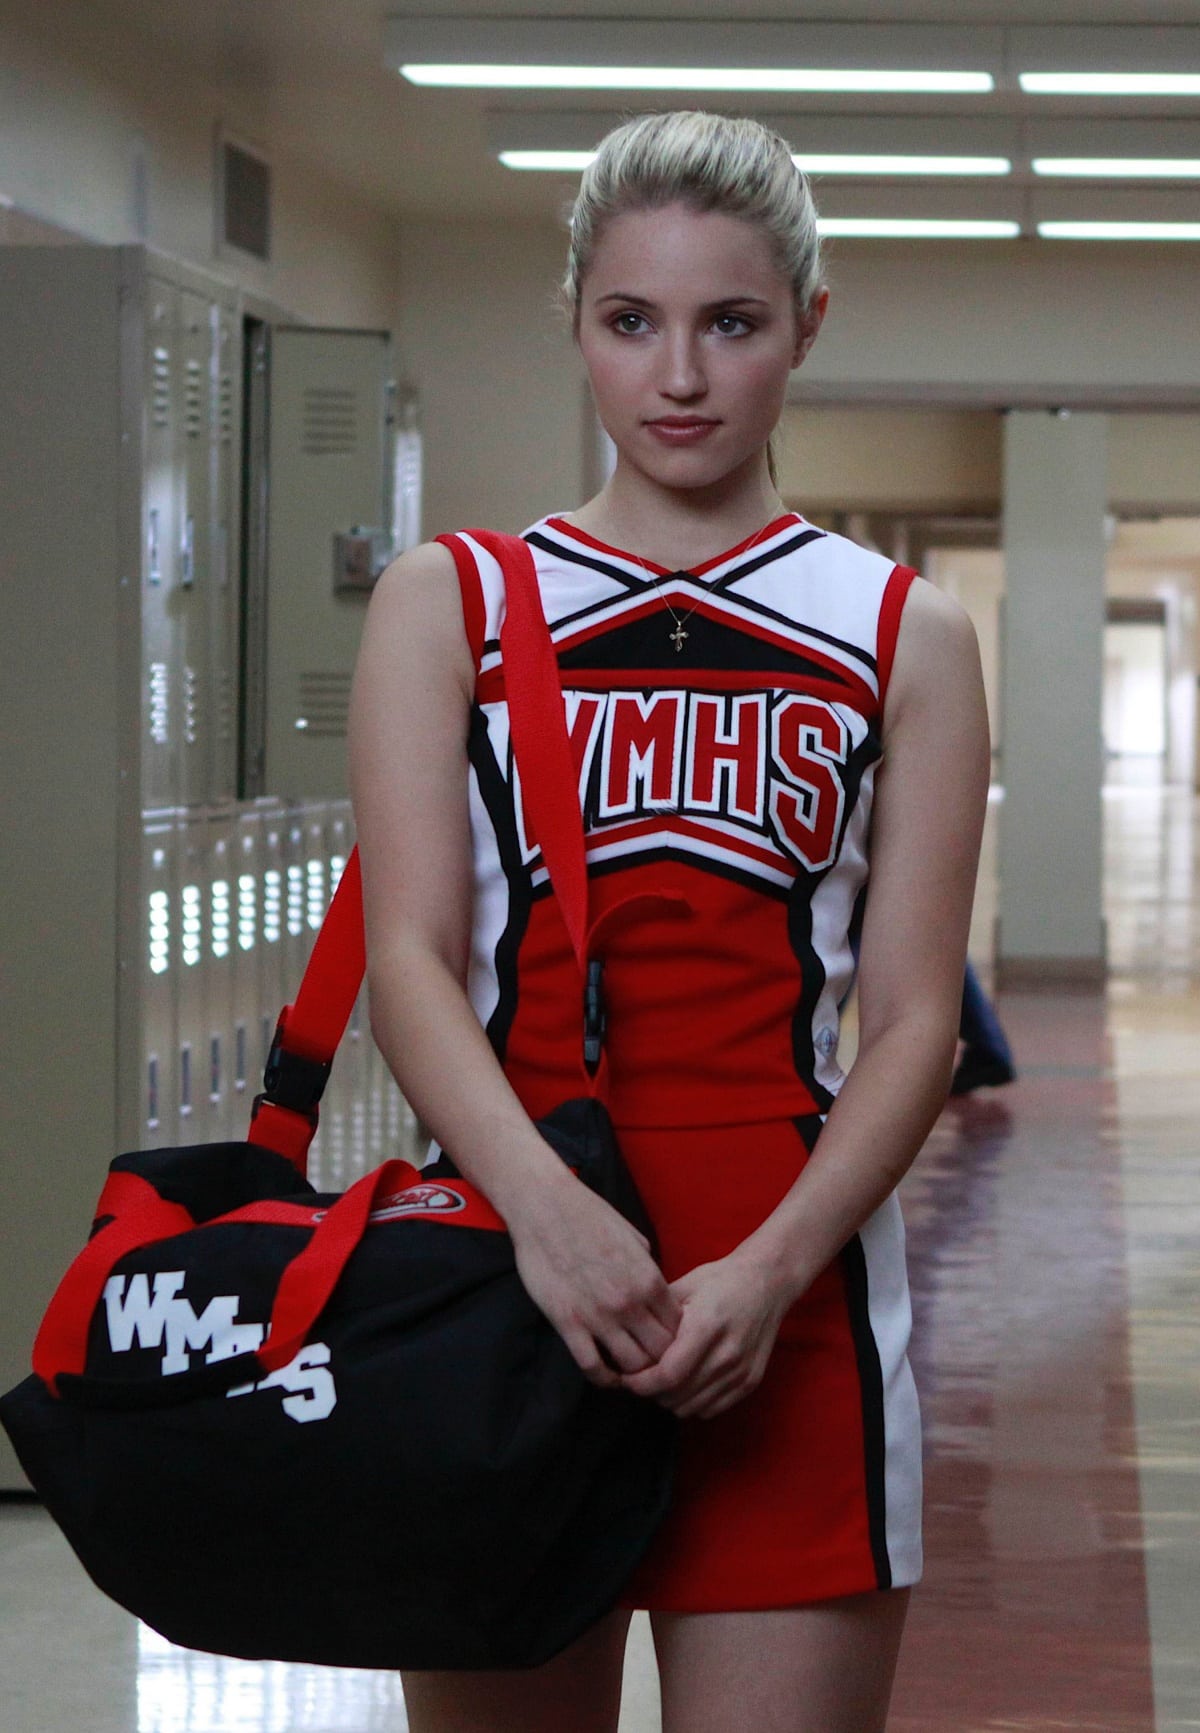 Cheerleader Quinn Fabray was portrayed by Dianna Agron in the hit musical comedy-drama television series Glee